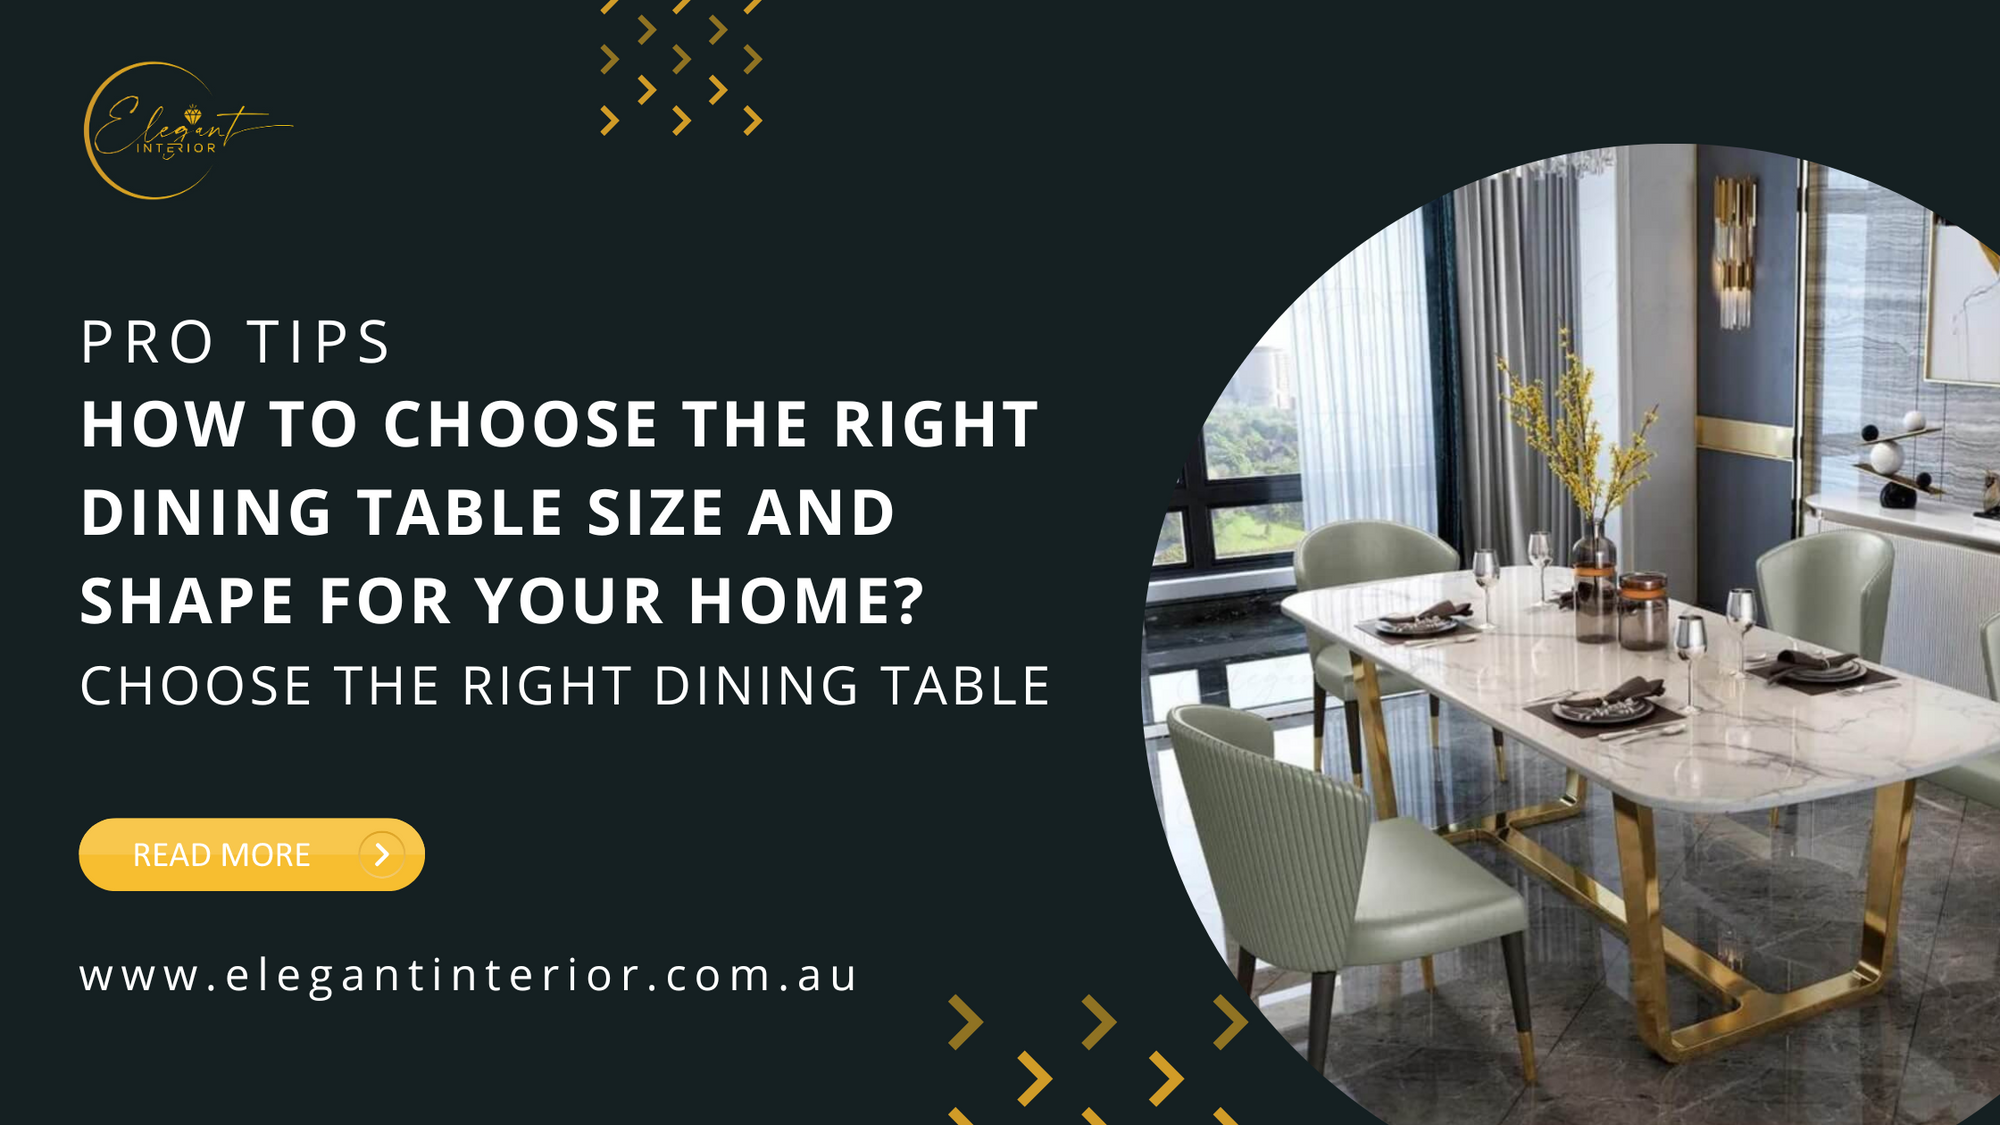 Pro Tips: How To Choose The Right Dining Table Size and Shape for Your Home?